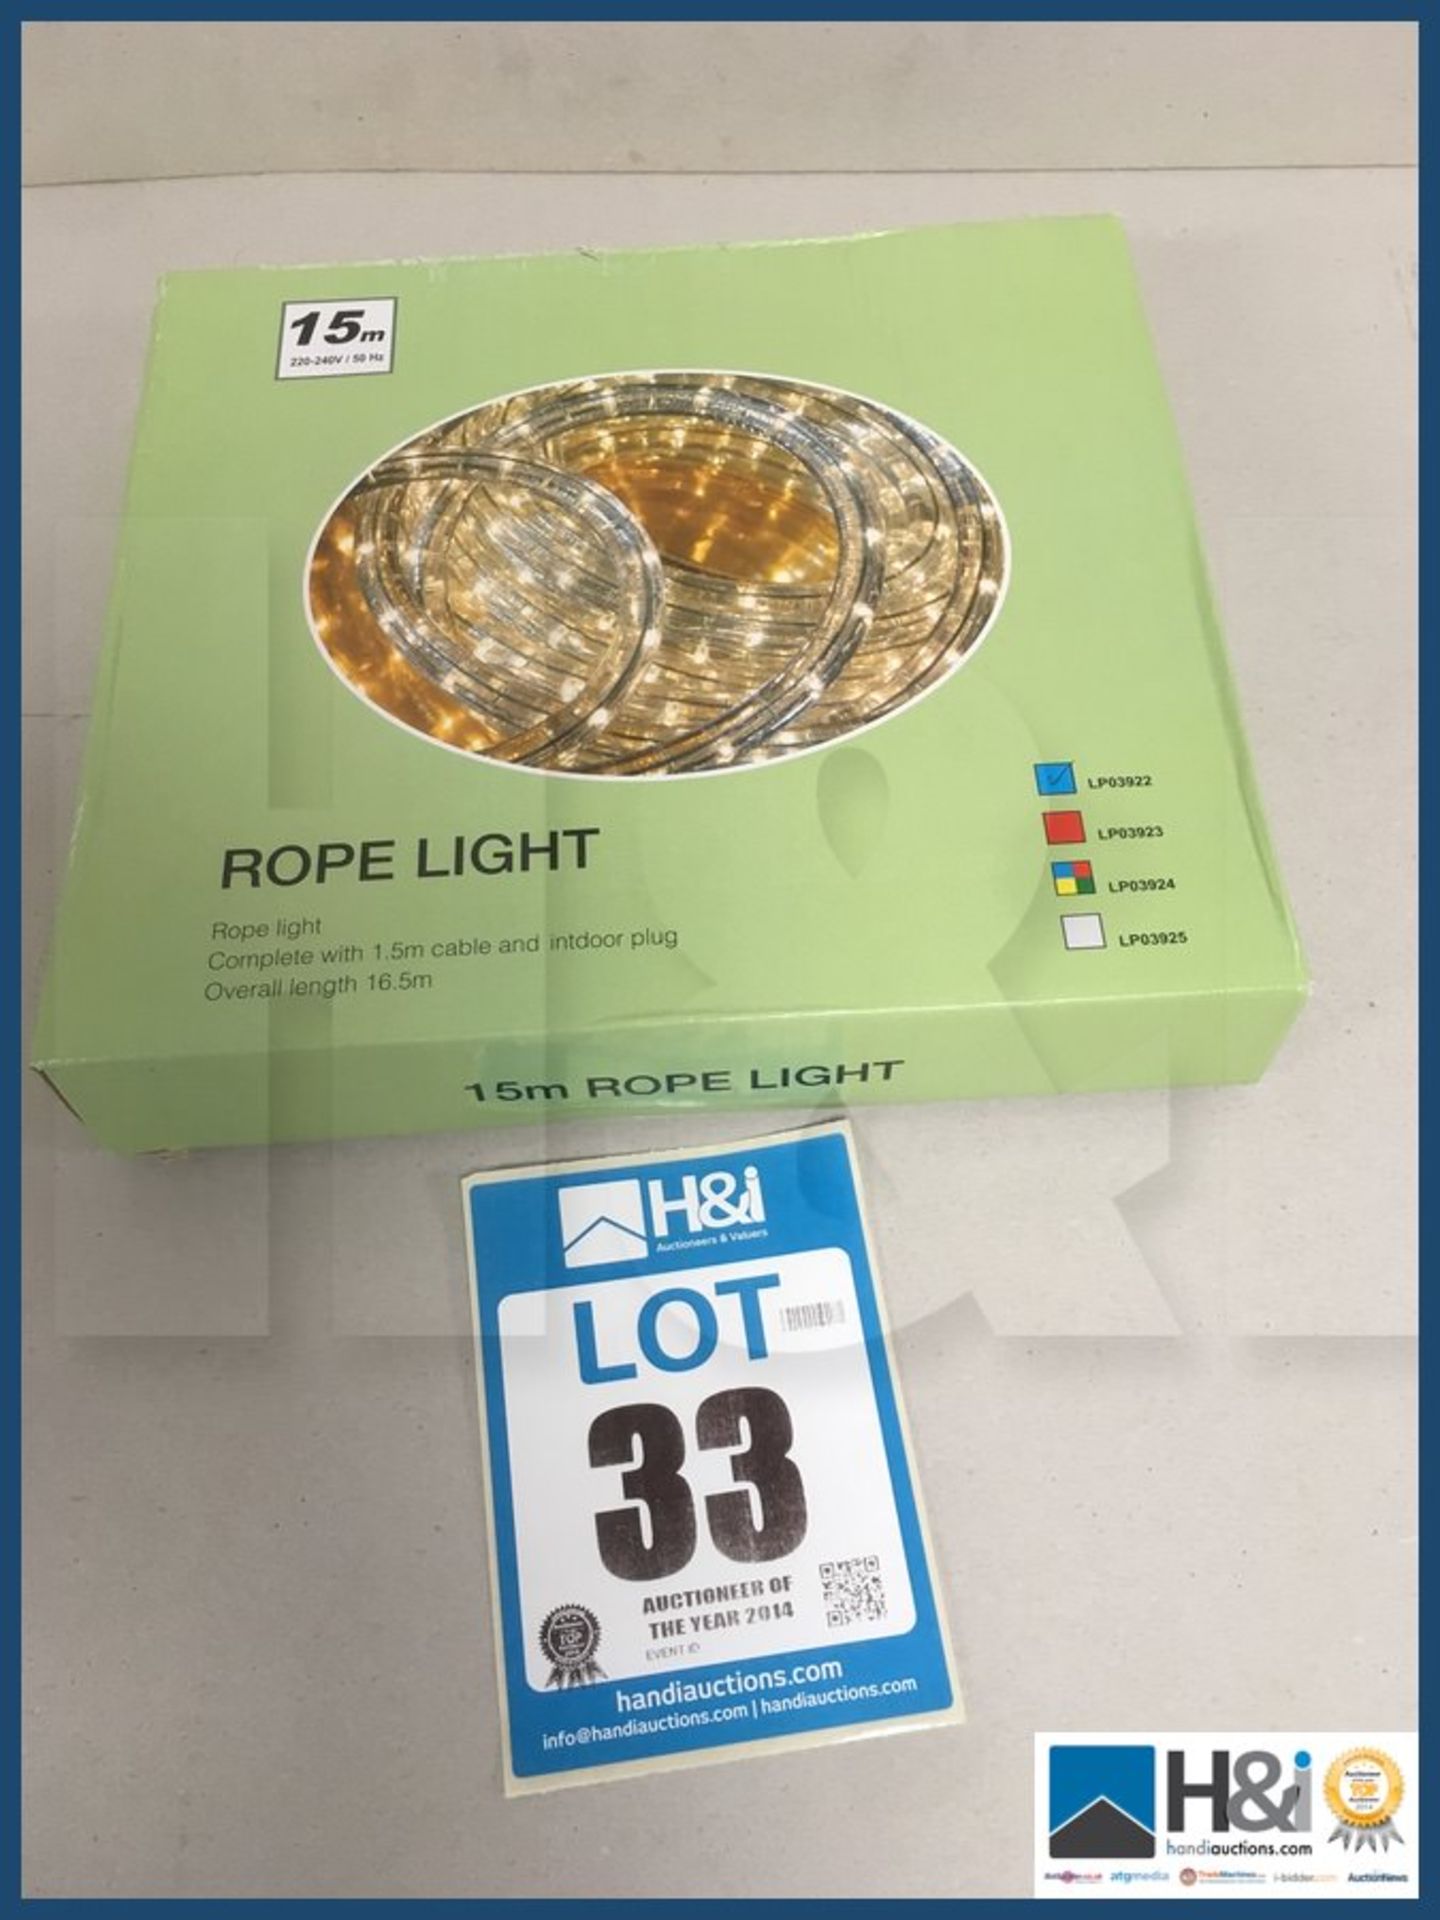 Brand new 15 meter LED rope light with various light display functions new in box. NO VAT on item ex